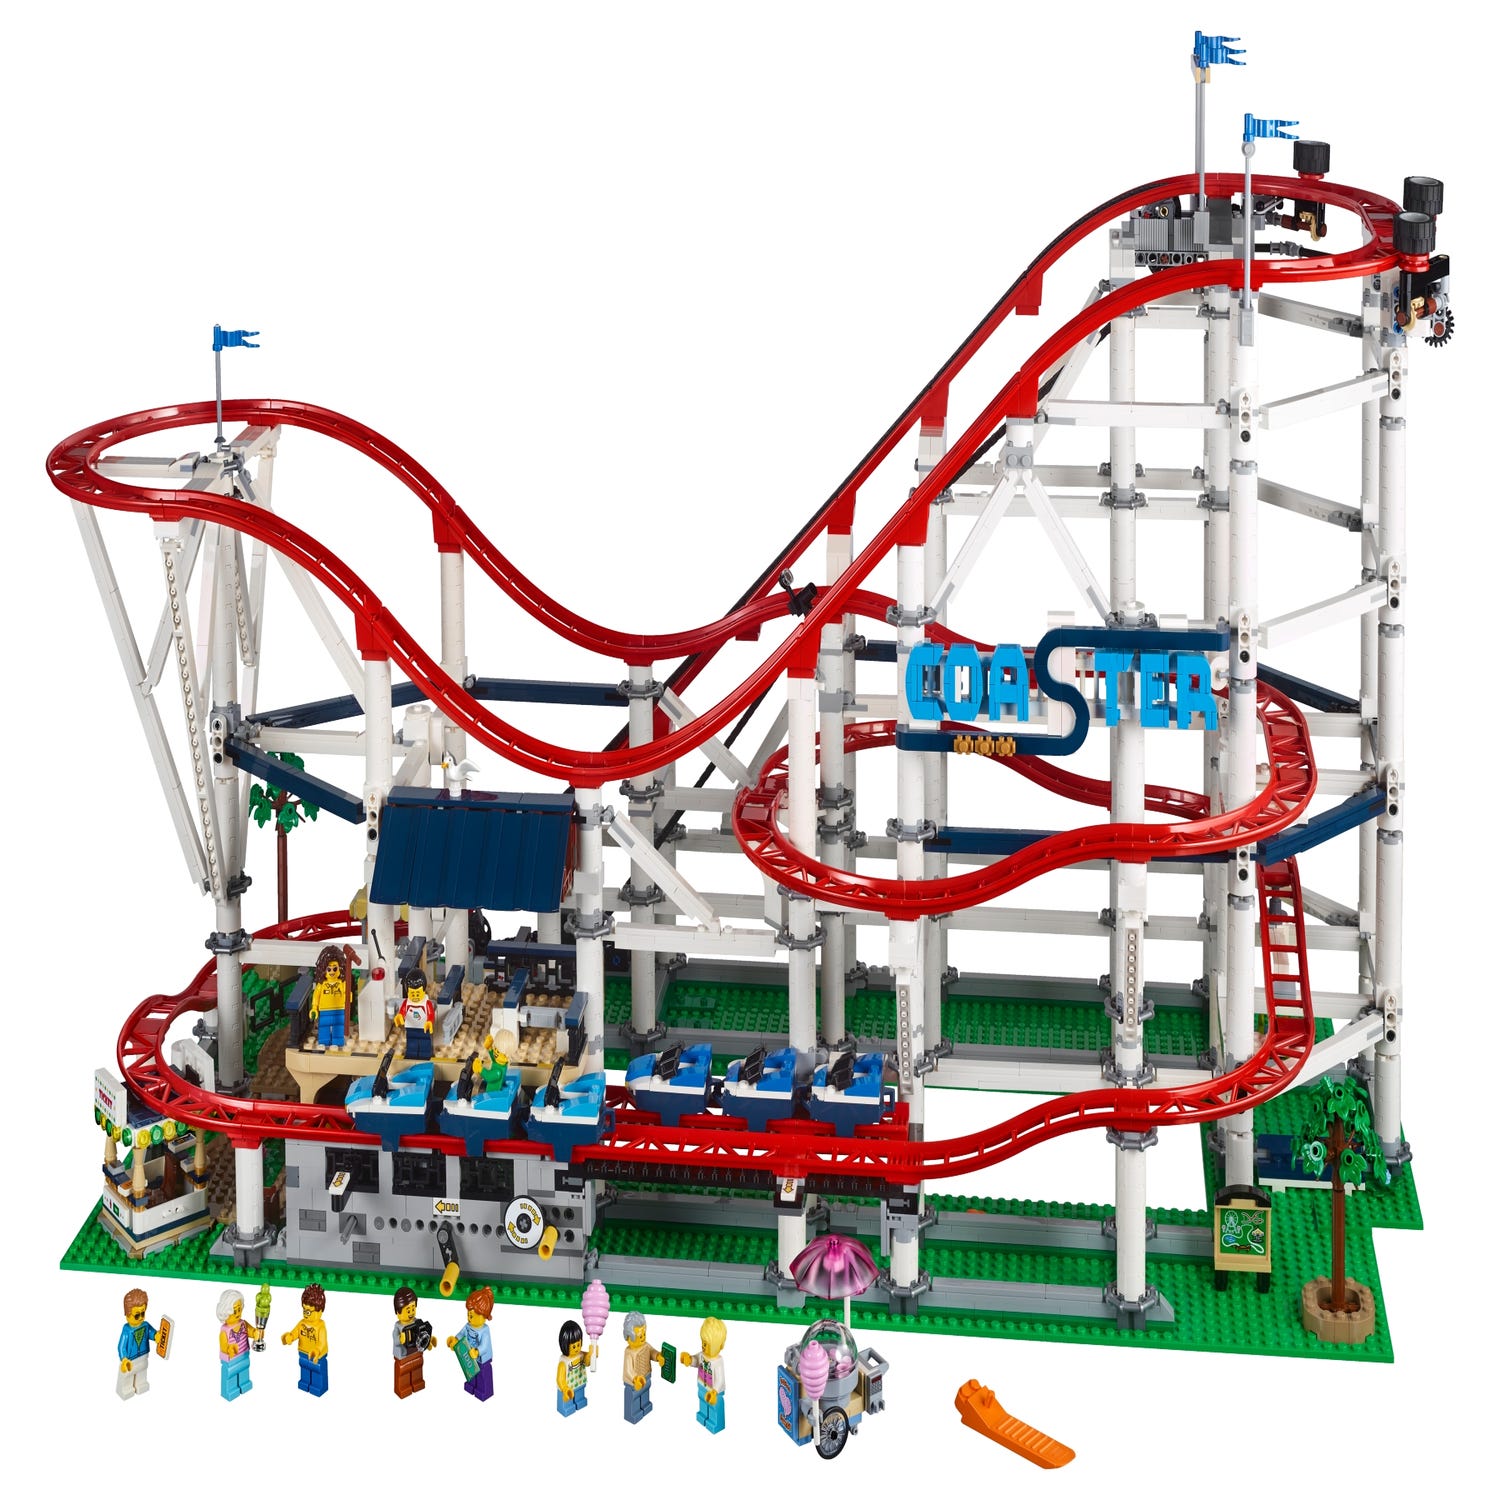 Roller Coaster 10261 Creator Expert Buy Online At The Official Lego